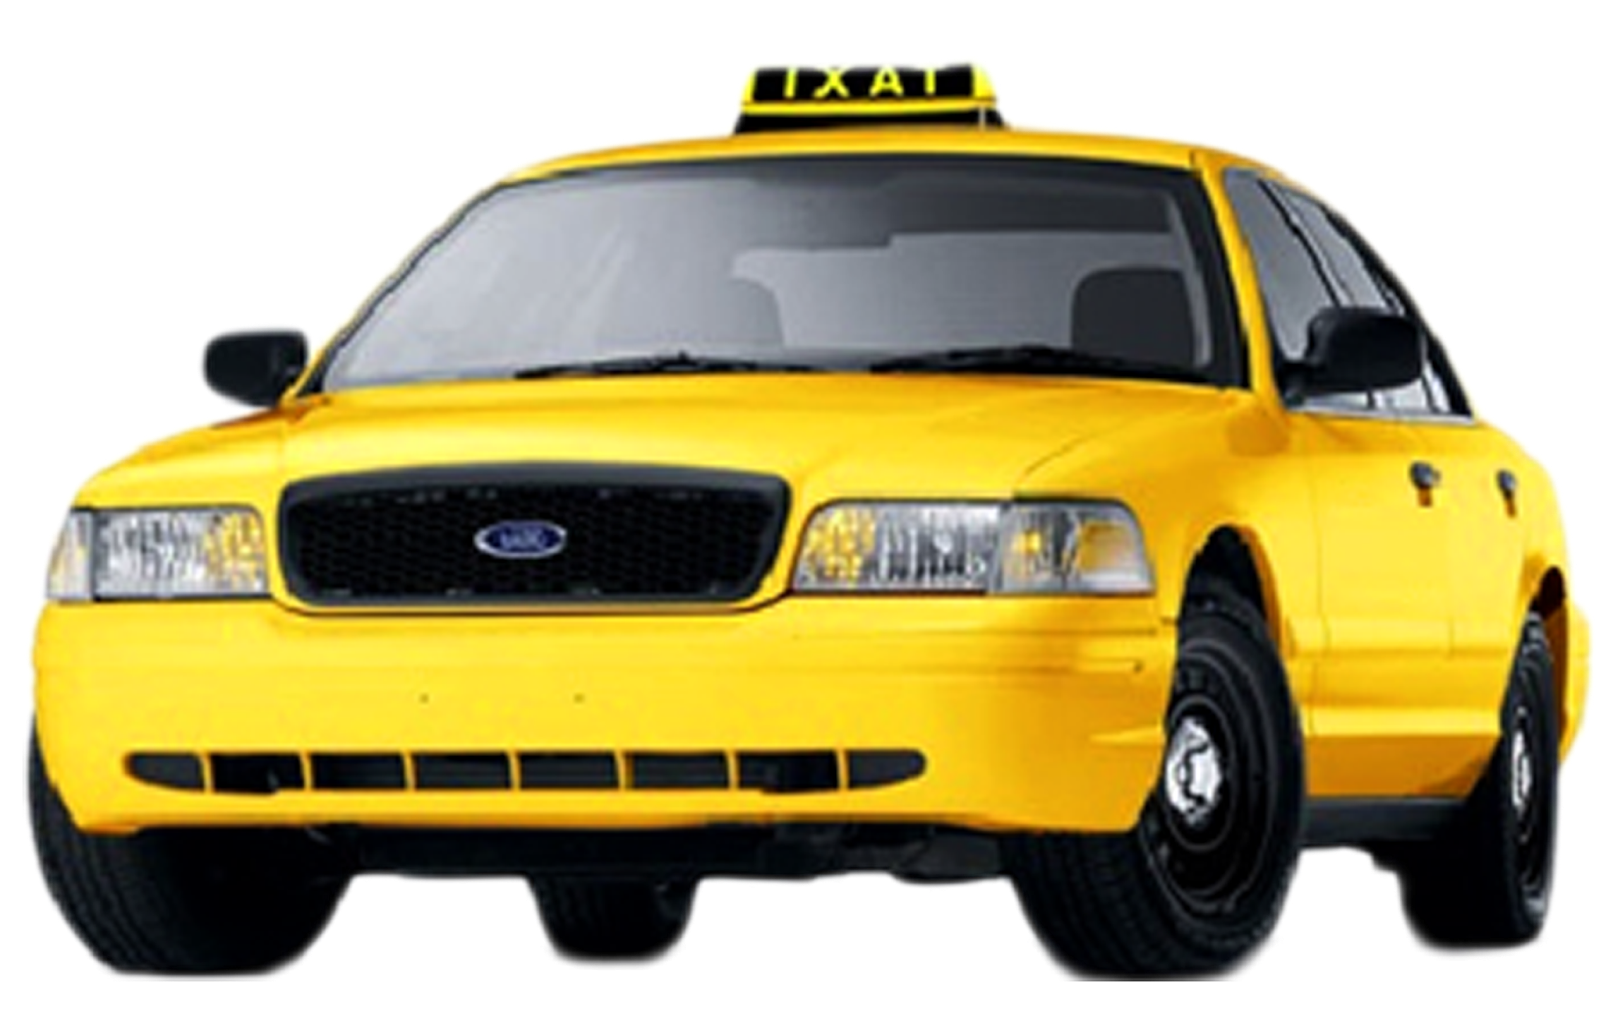 Taxi Cab PNG - Taxi Cab High-Quality 